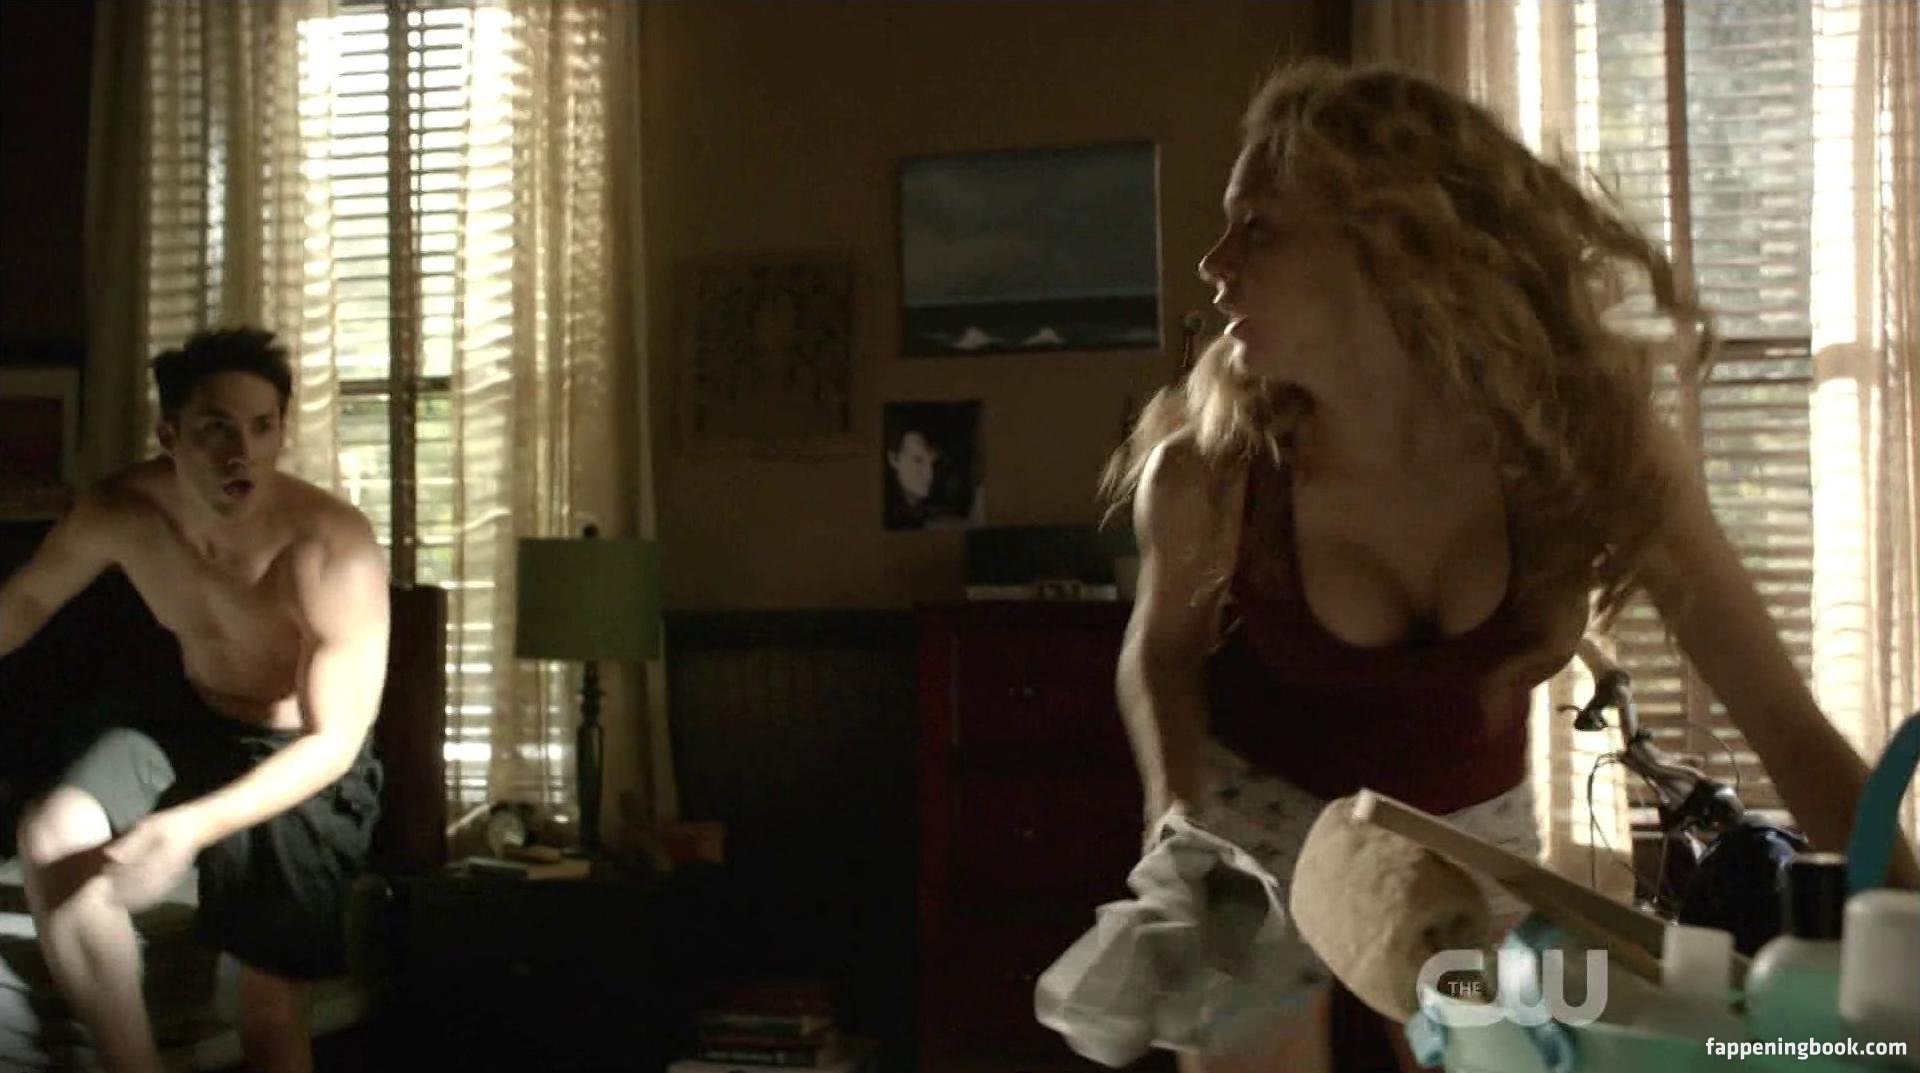 Penelope Mitchell Nude, The Fappening - Photo #440285 - FappeningBook.